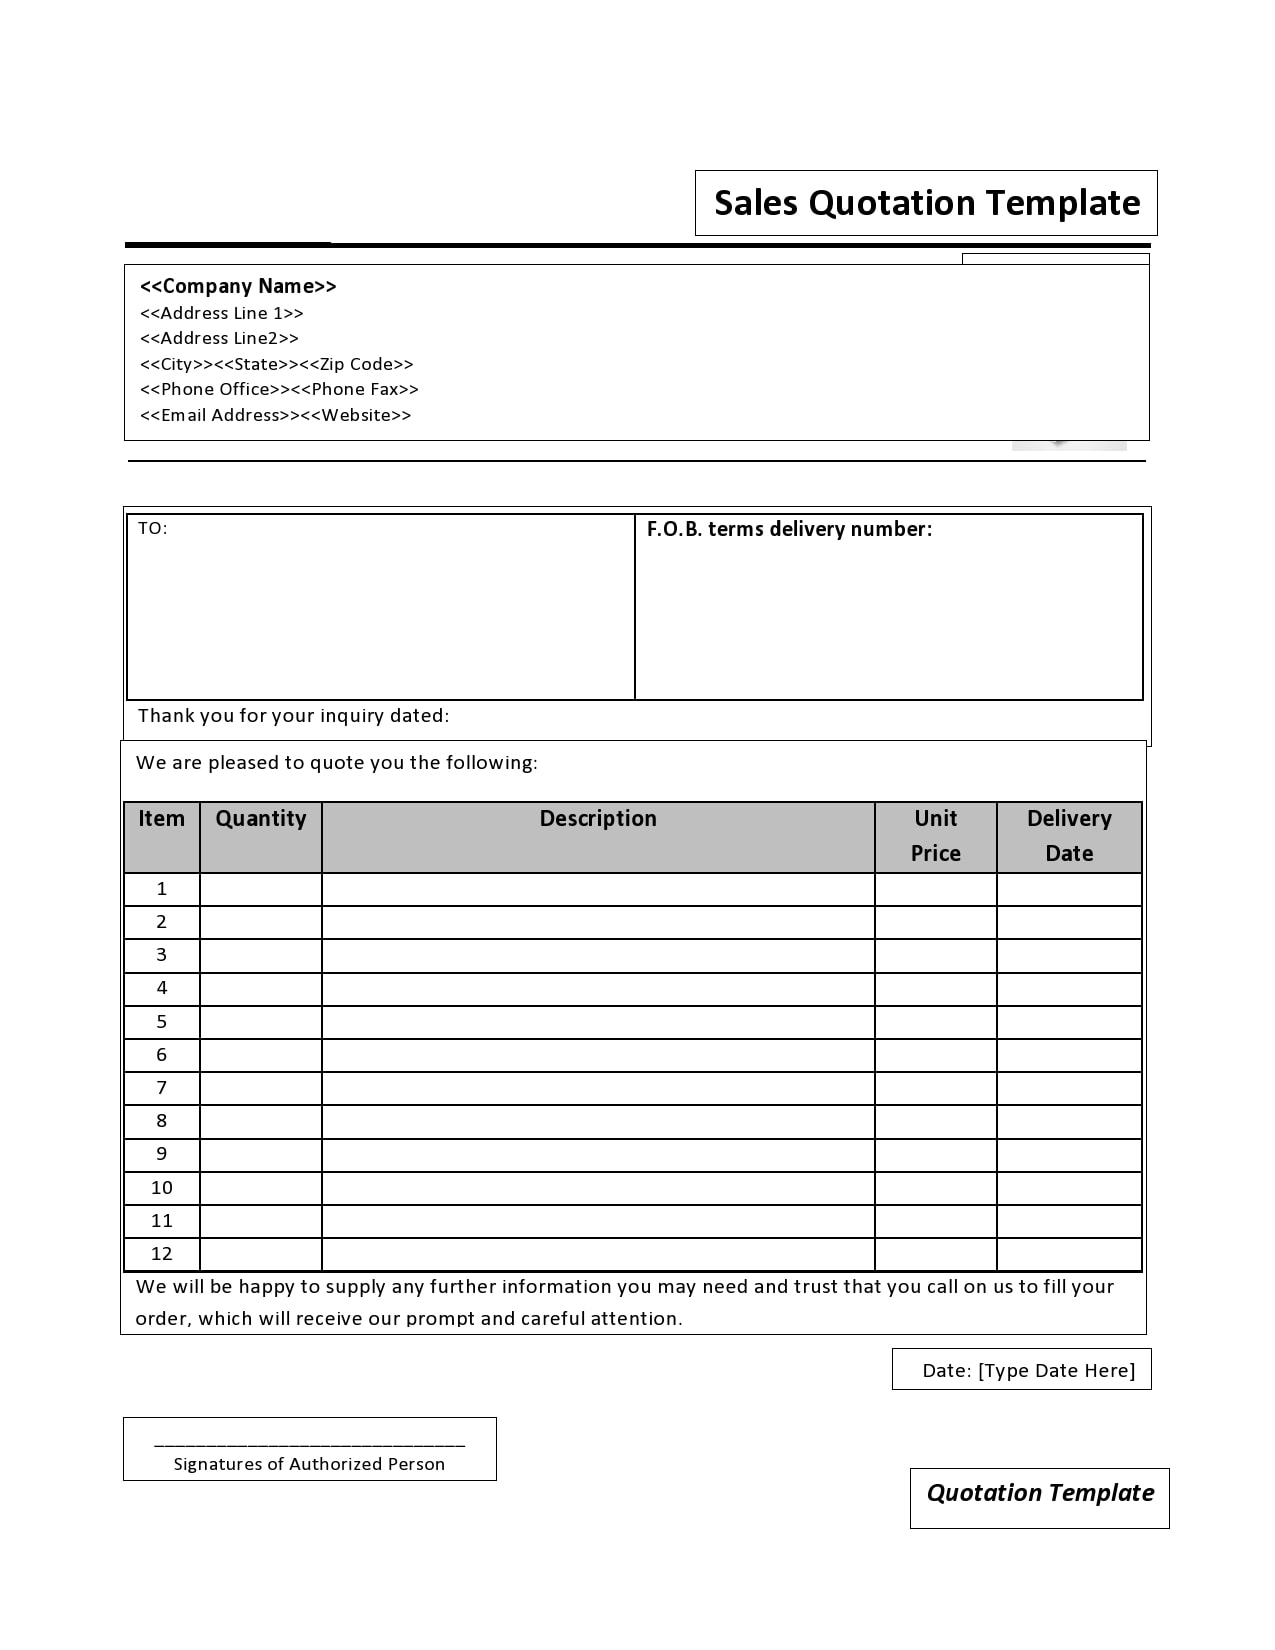 quotation template pdf free download